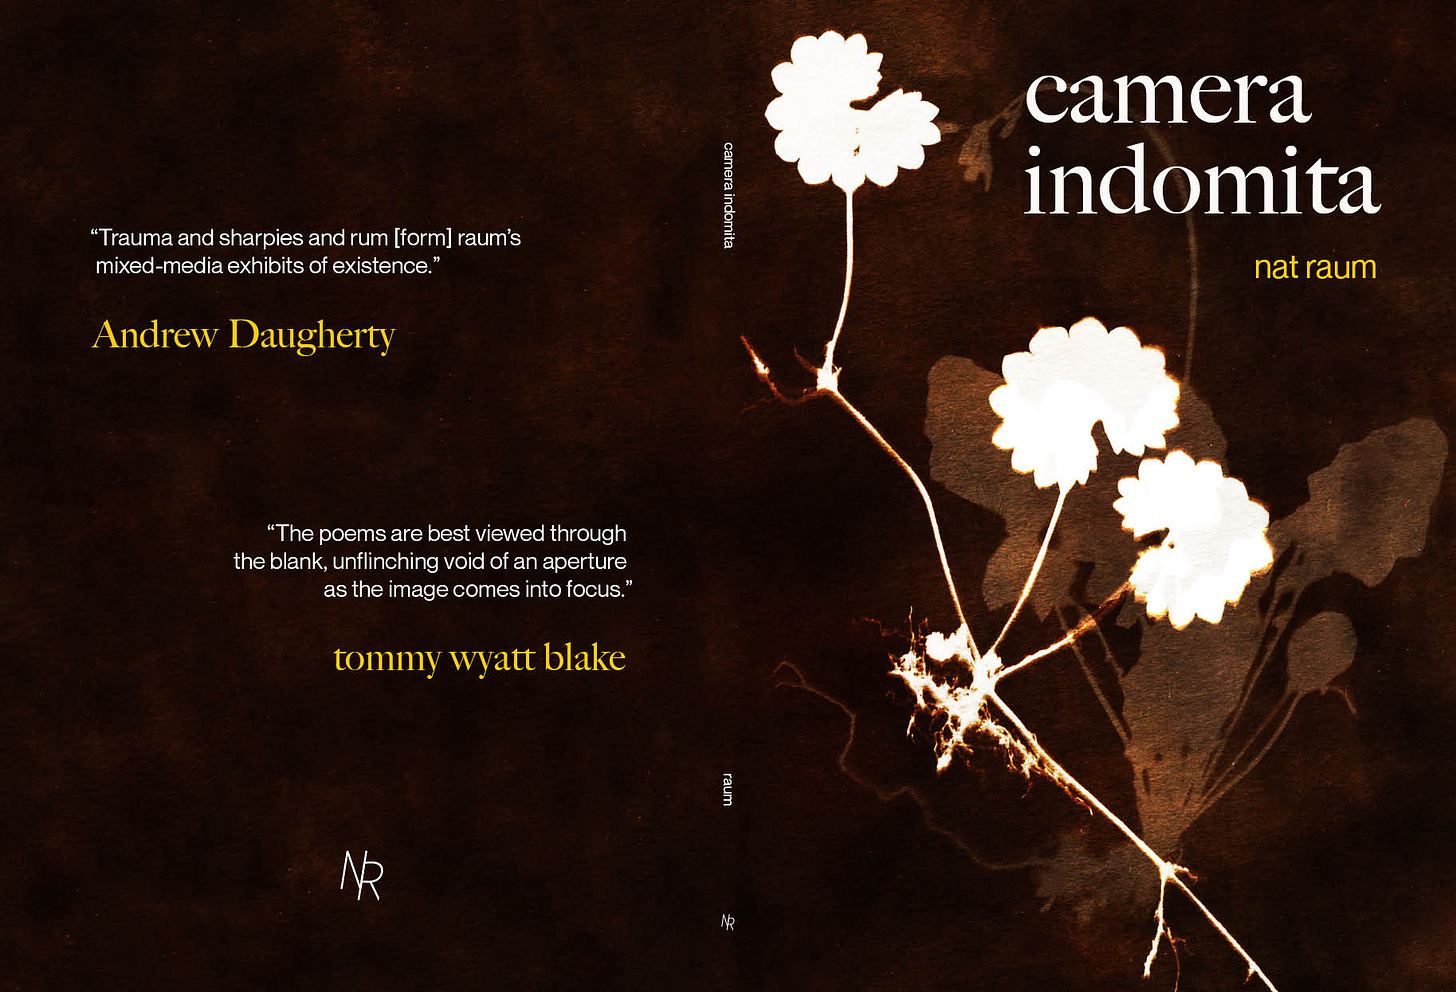 The cover of nat raum's 'camera indomita', which features two layered van dyke prints and blurb excerpts by Andrew Daugherty and tommy wyatt blake